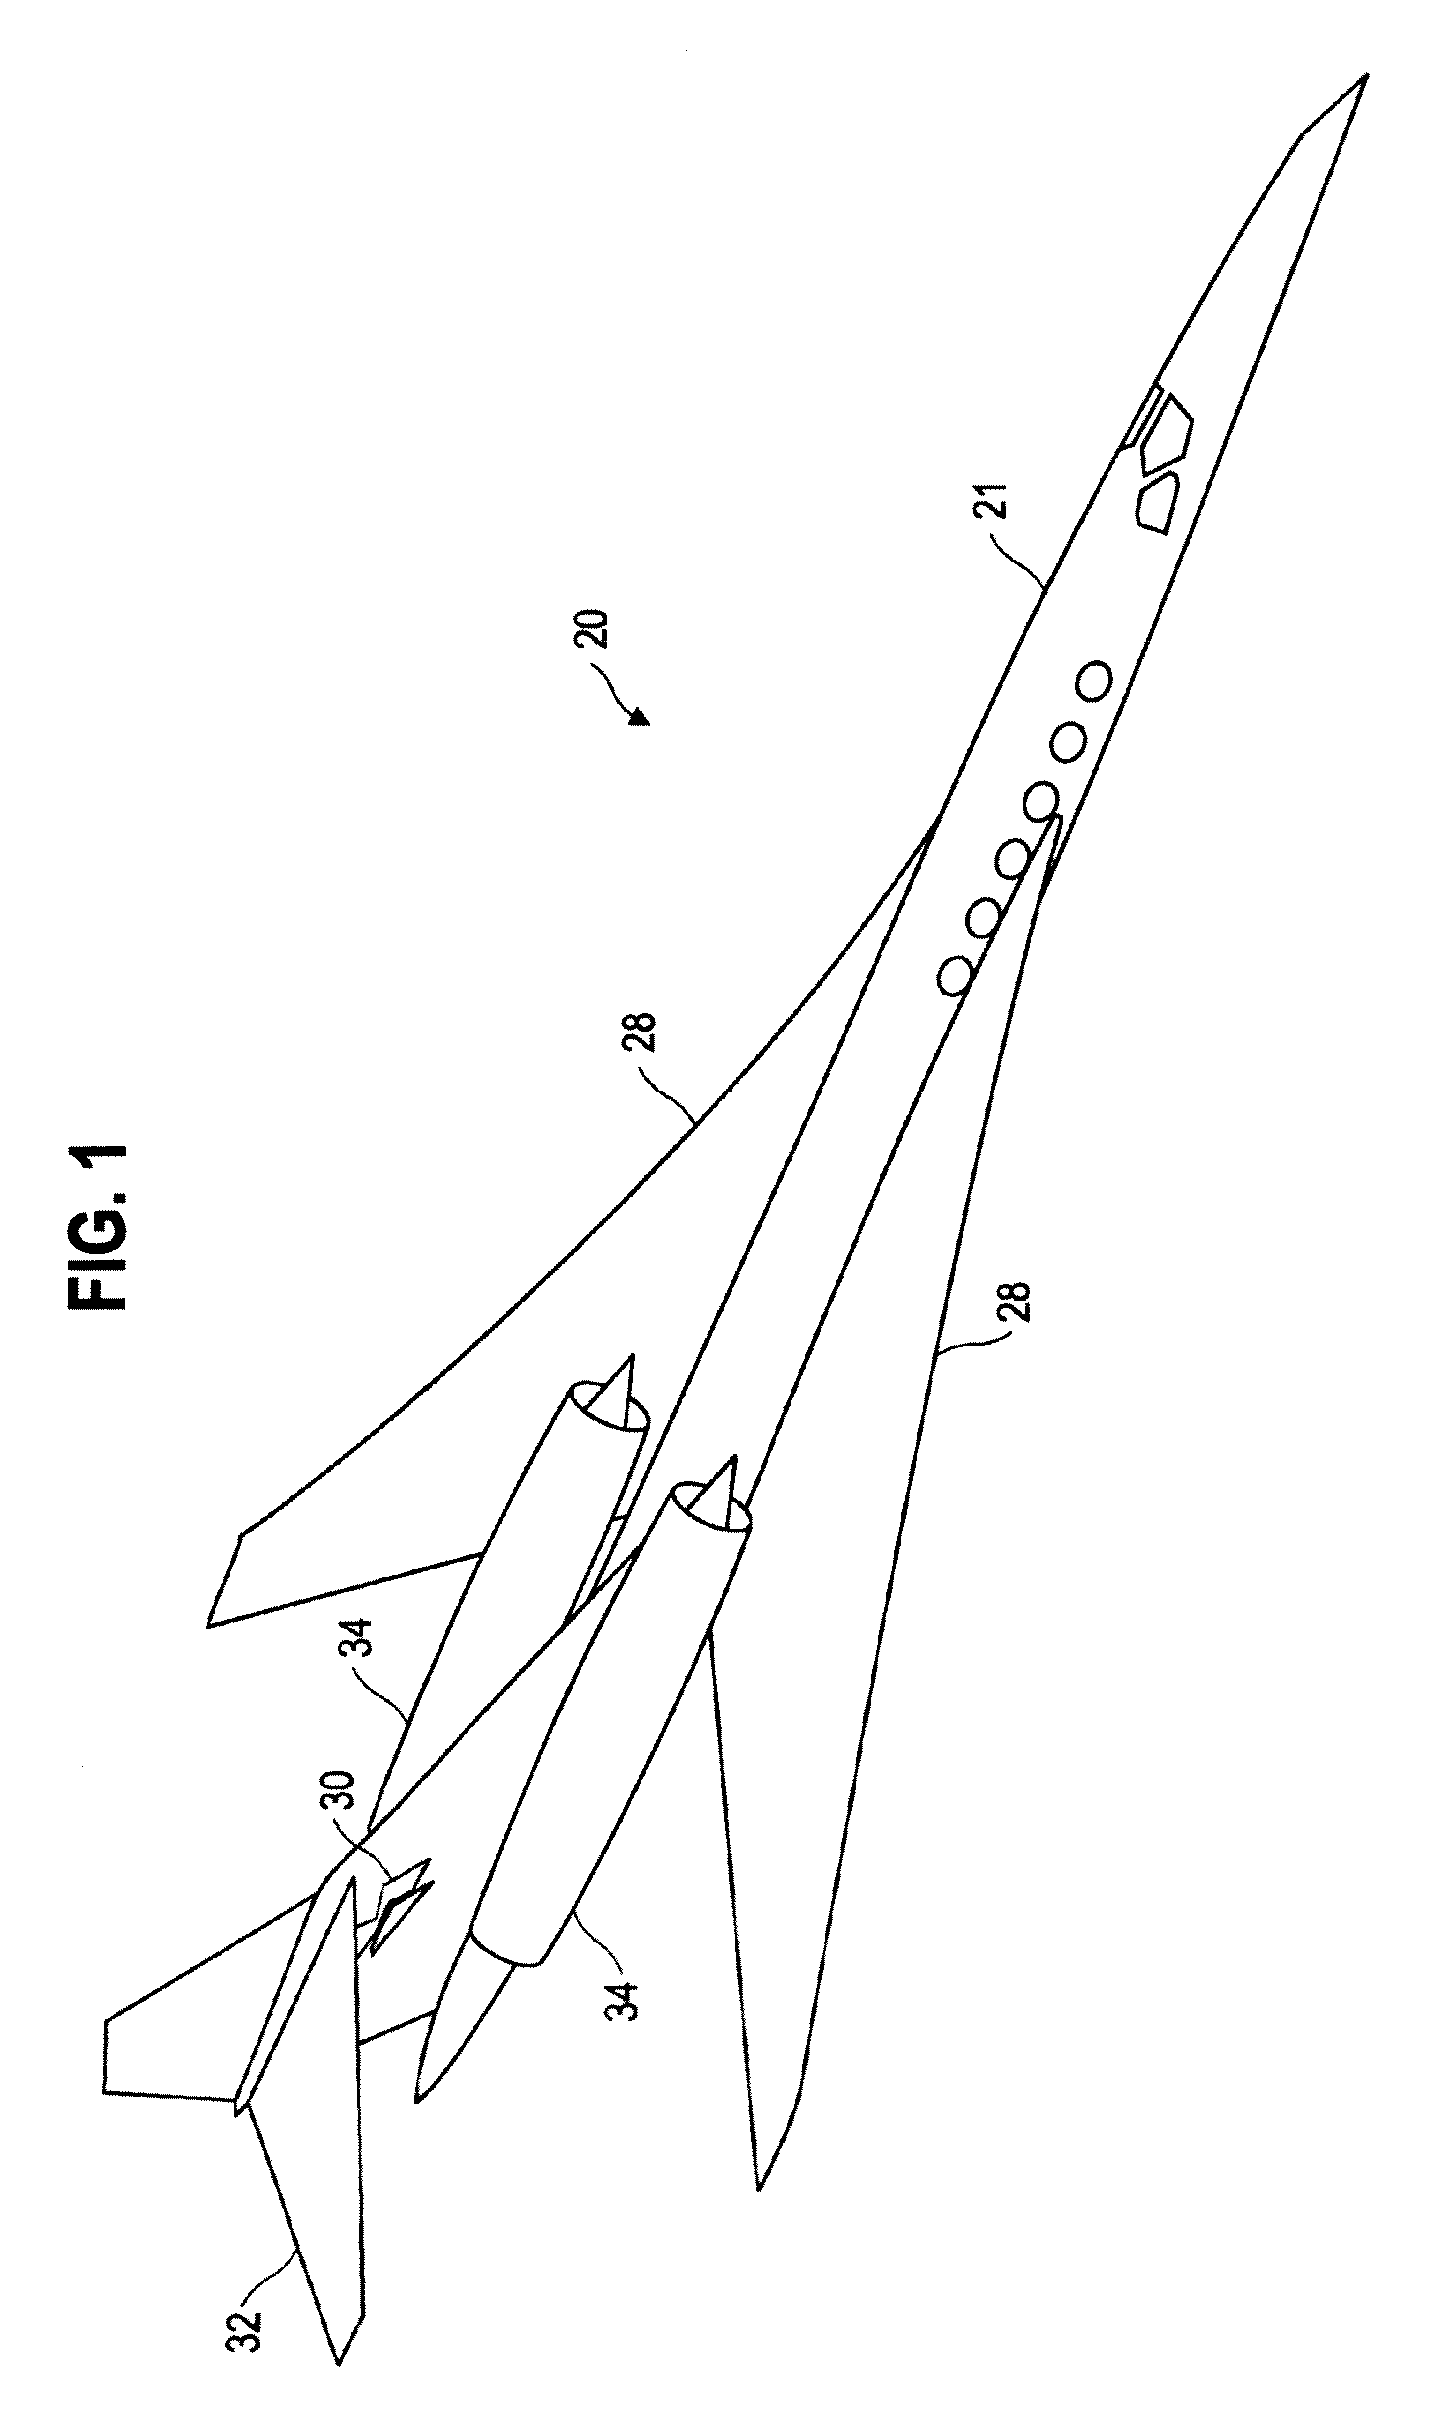 Supersonic Aircraft with Spike for Controlling and Reducing Sonic Boom